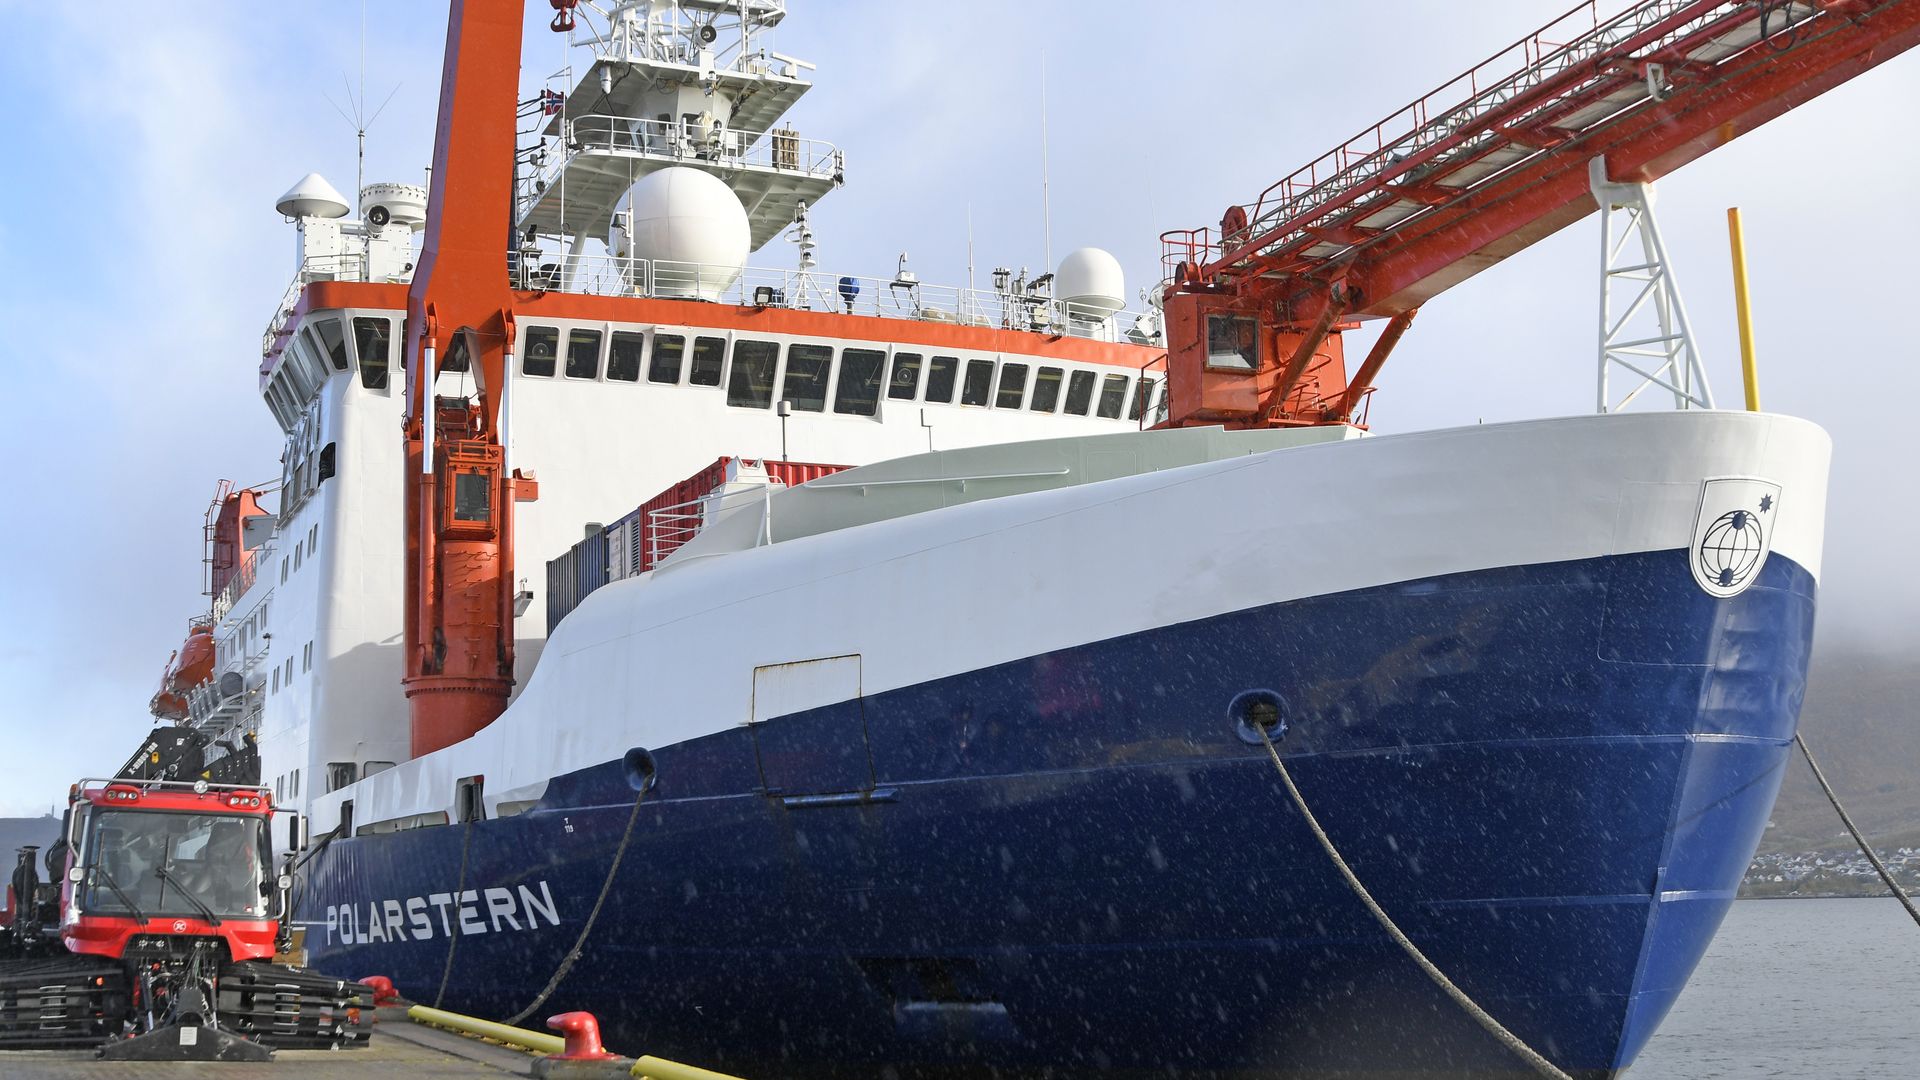 In this image, the research vessel Polarstern is docked and faces the camera nearly head on